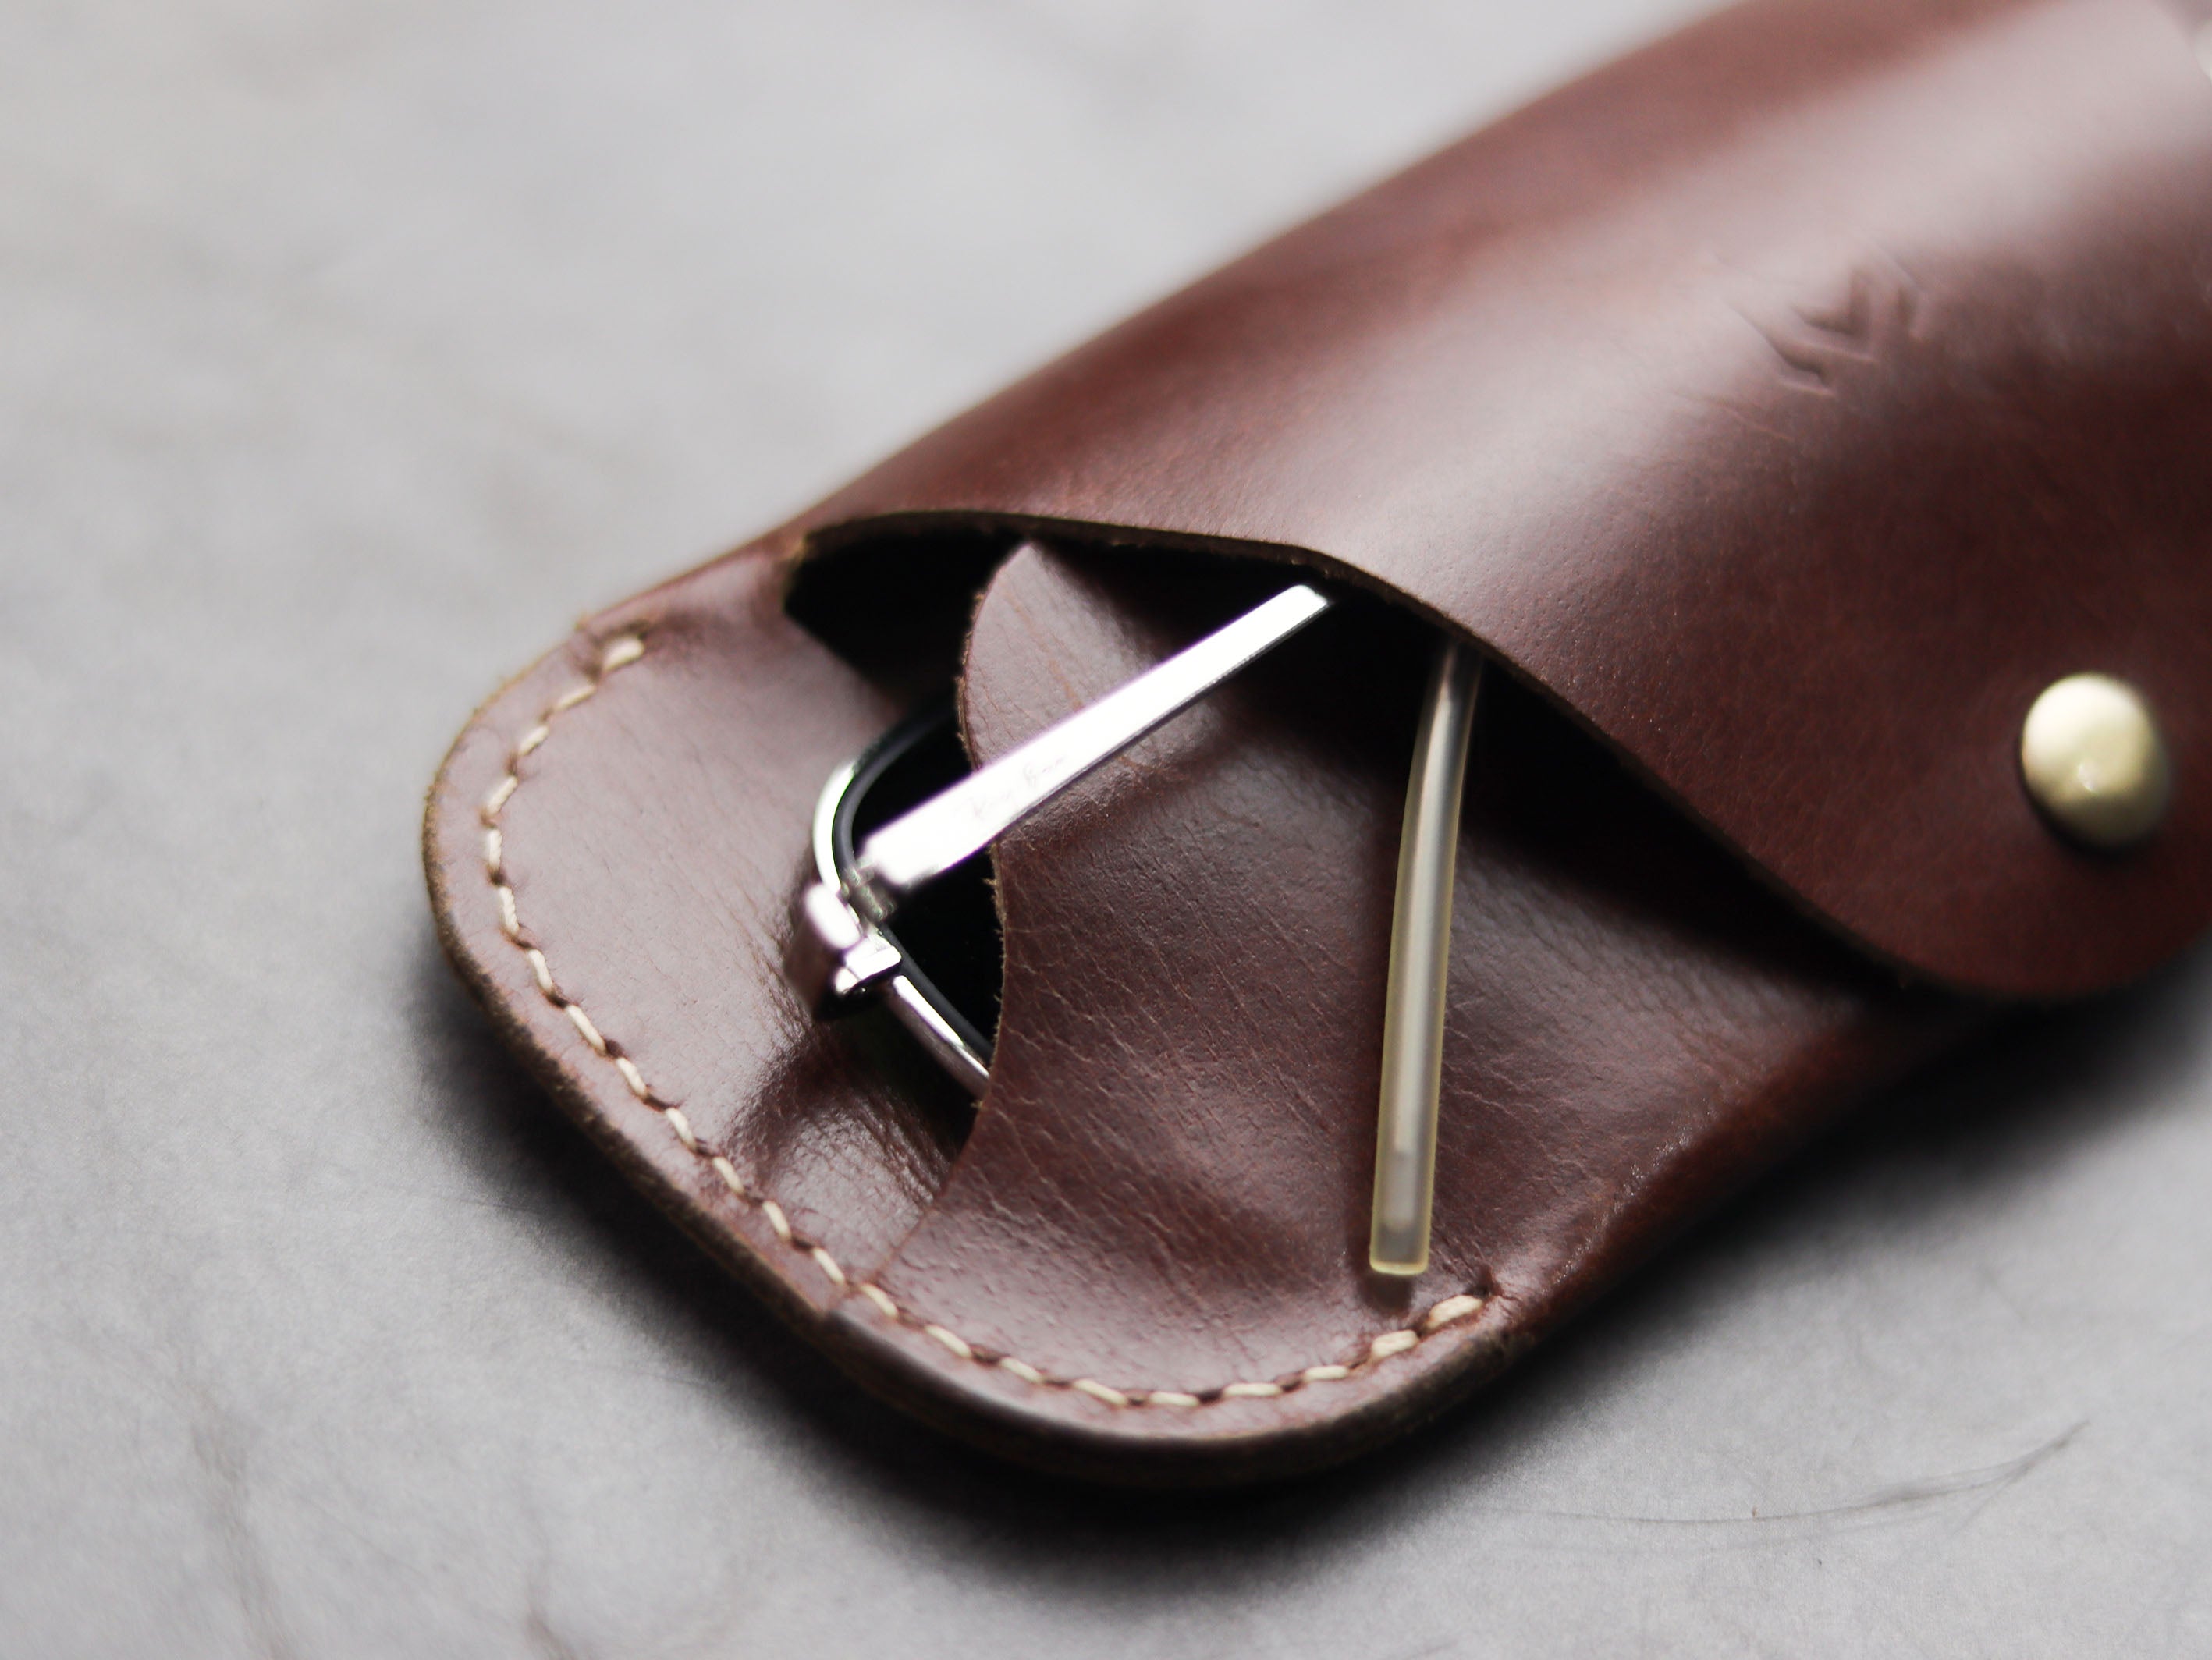 SG-2 SUNGLASSES CASE - WHISKY BROWN LEATHER